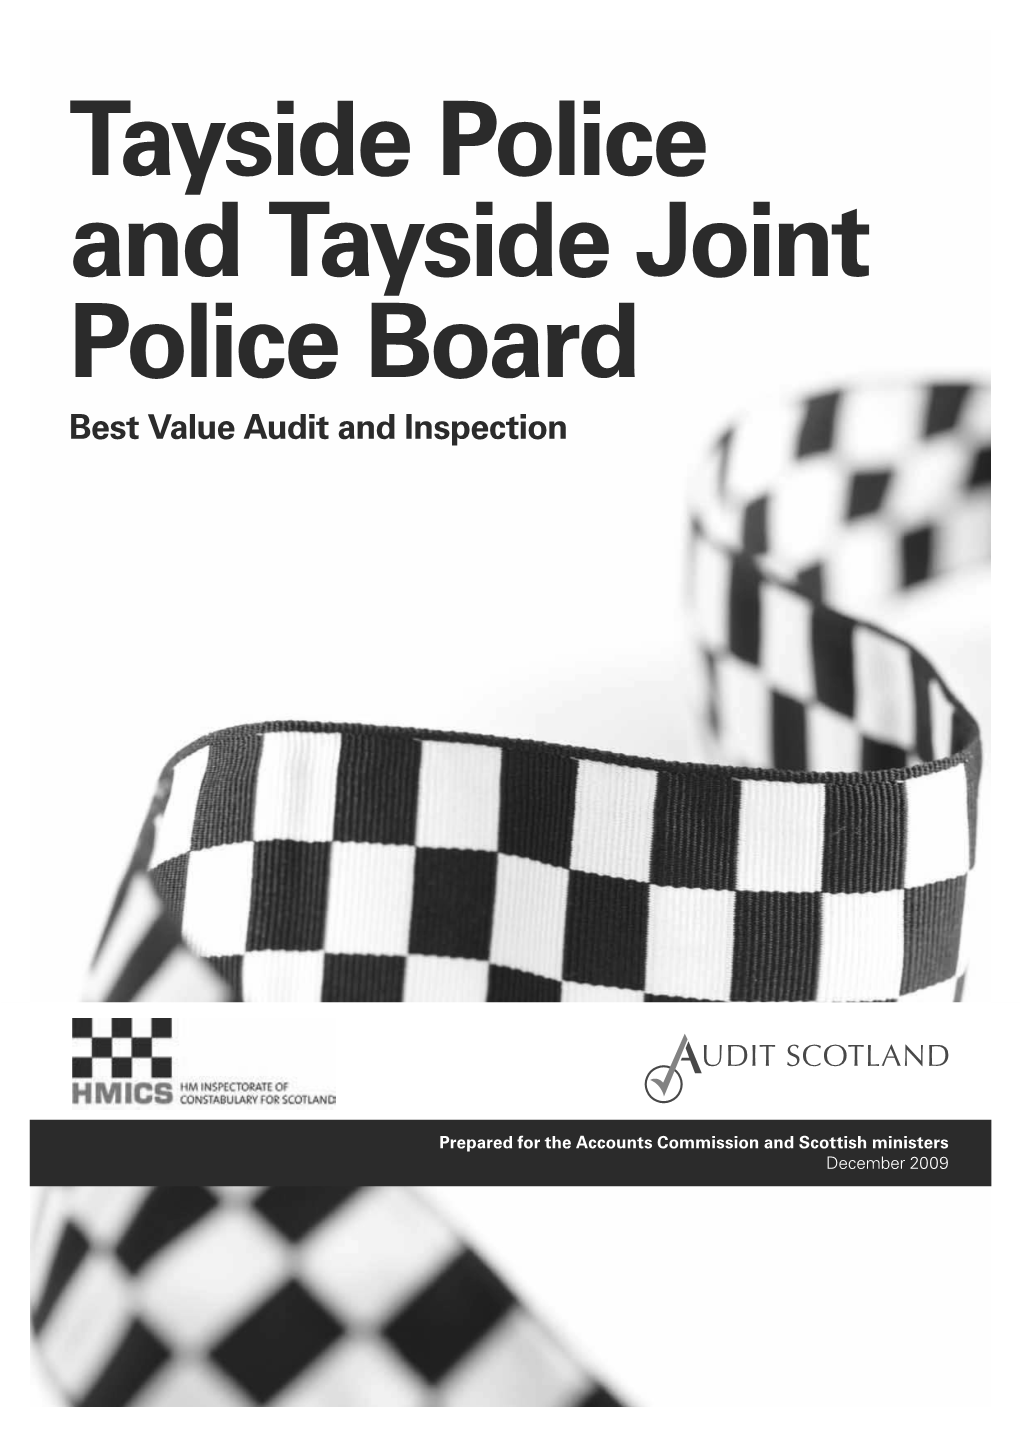 Tayside Police and Tayside Joint Police Board Best Value Audit and Inspection